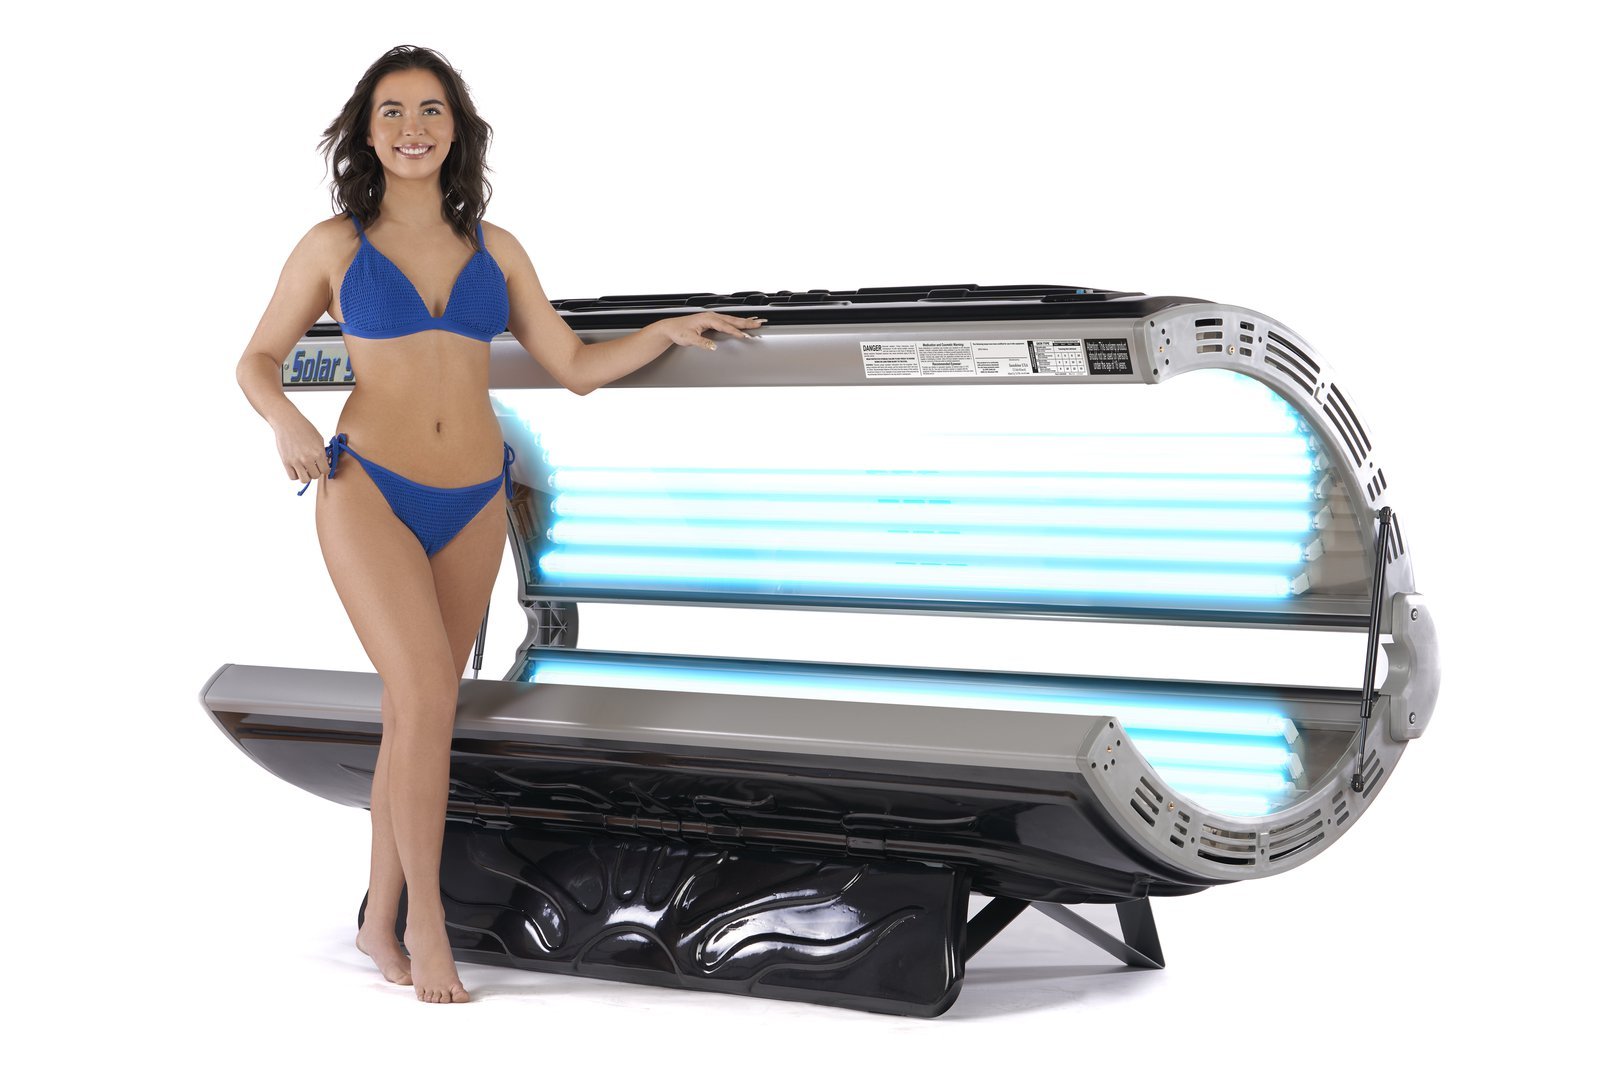 Solar Storm 32R Standard 220 Volt Tanning Bed Call For Total Pricing and Delivery Time